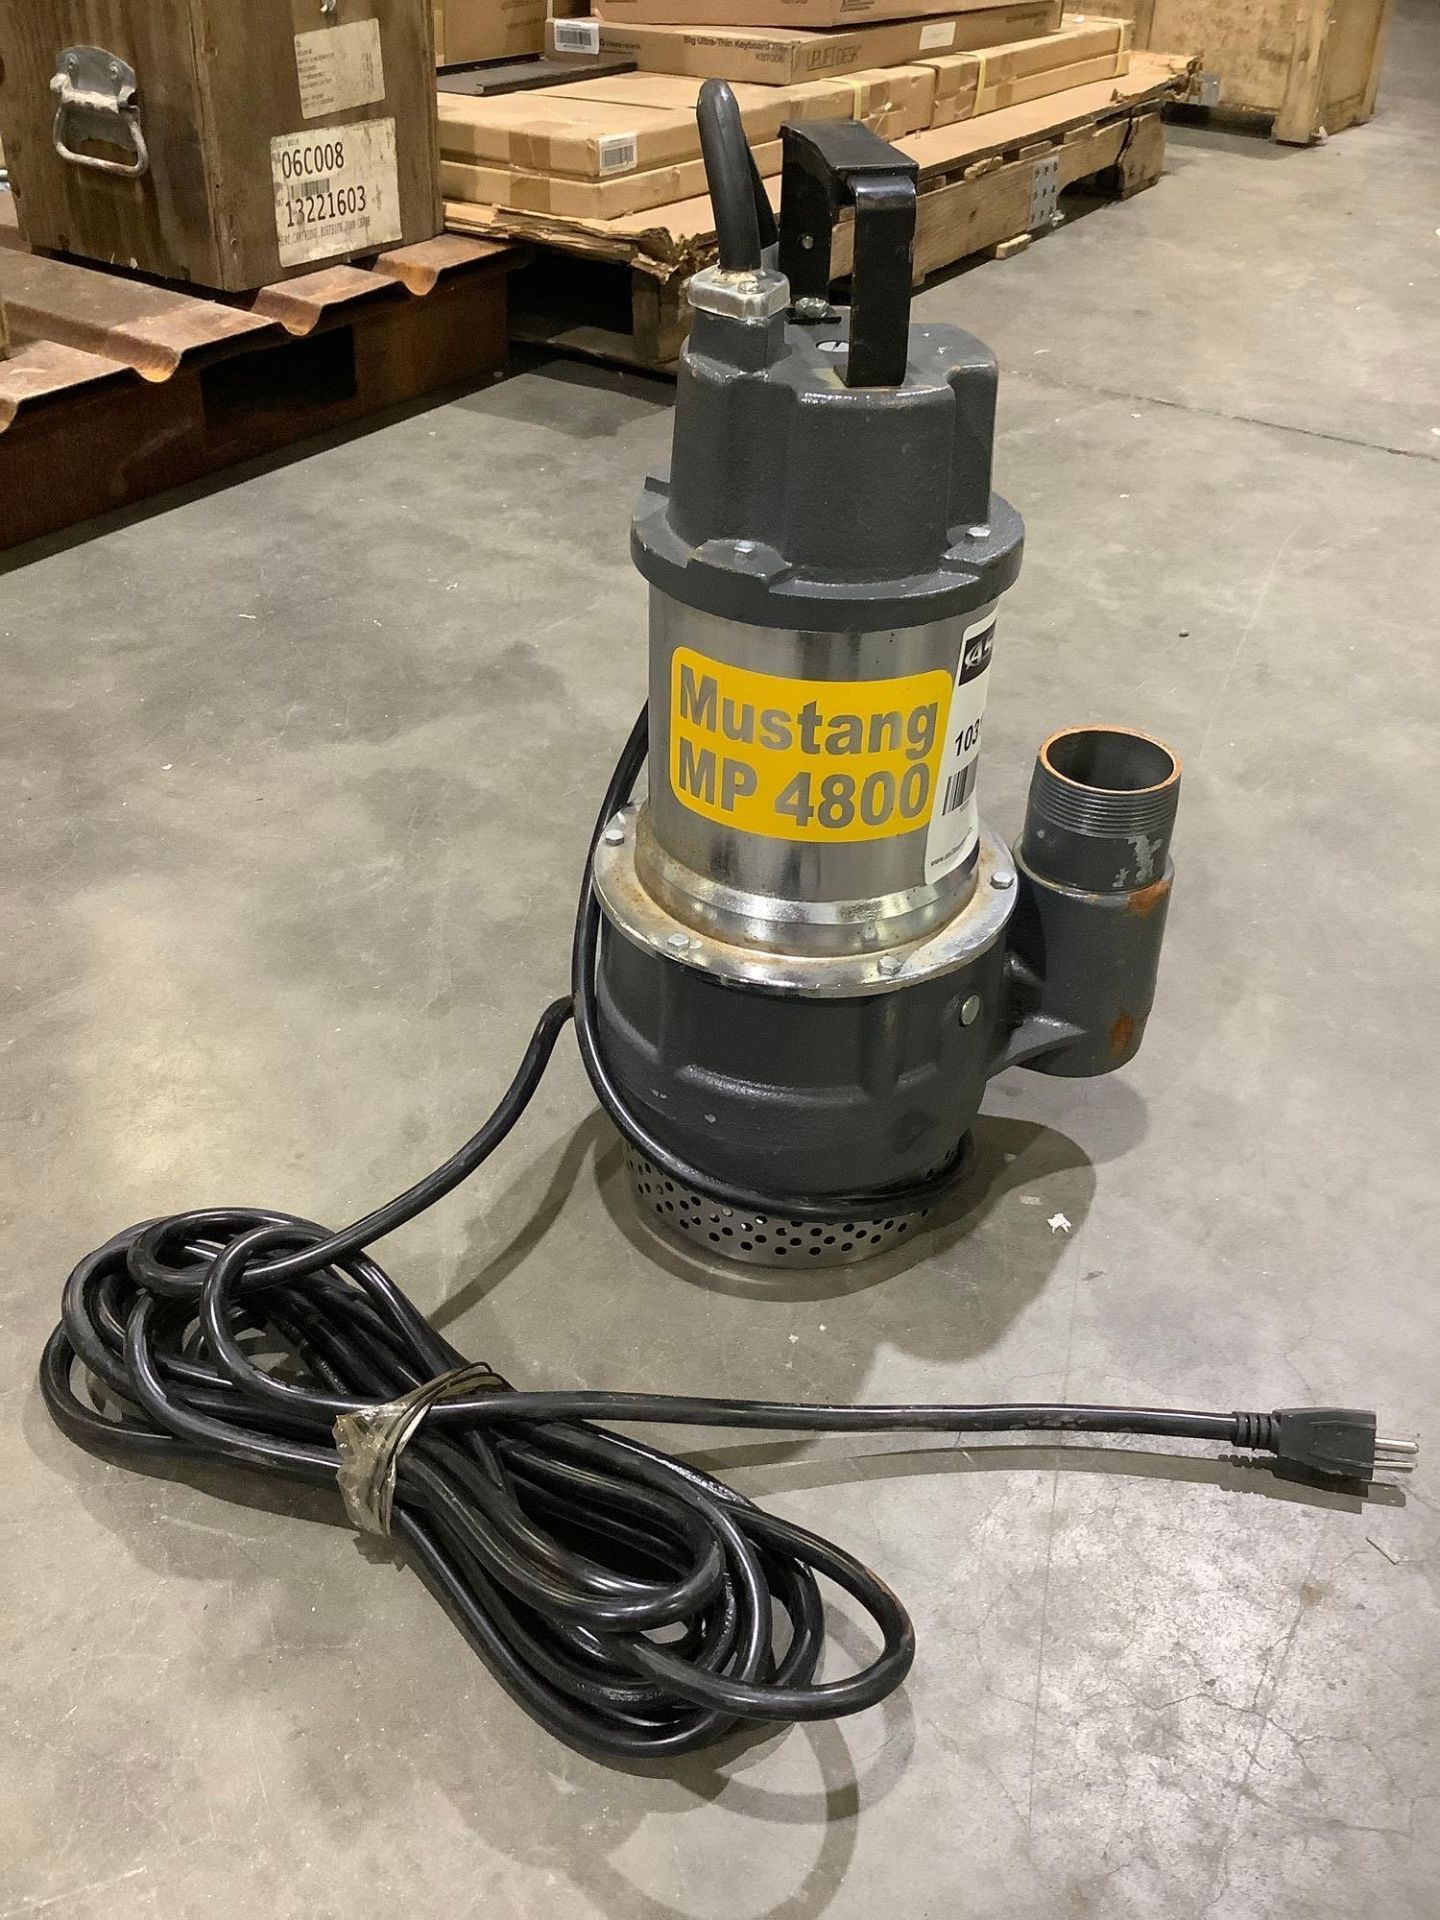 UNUSED SUBMERSIBLE MUSTANG MP4800 PUMP - Image 2 of 5